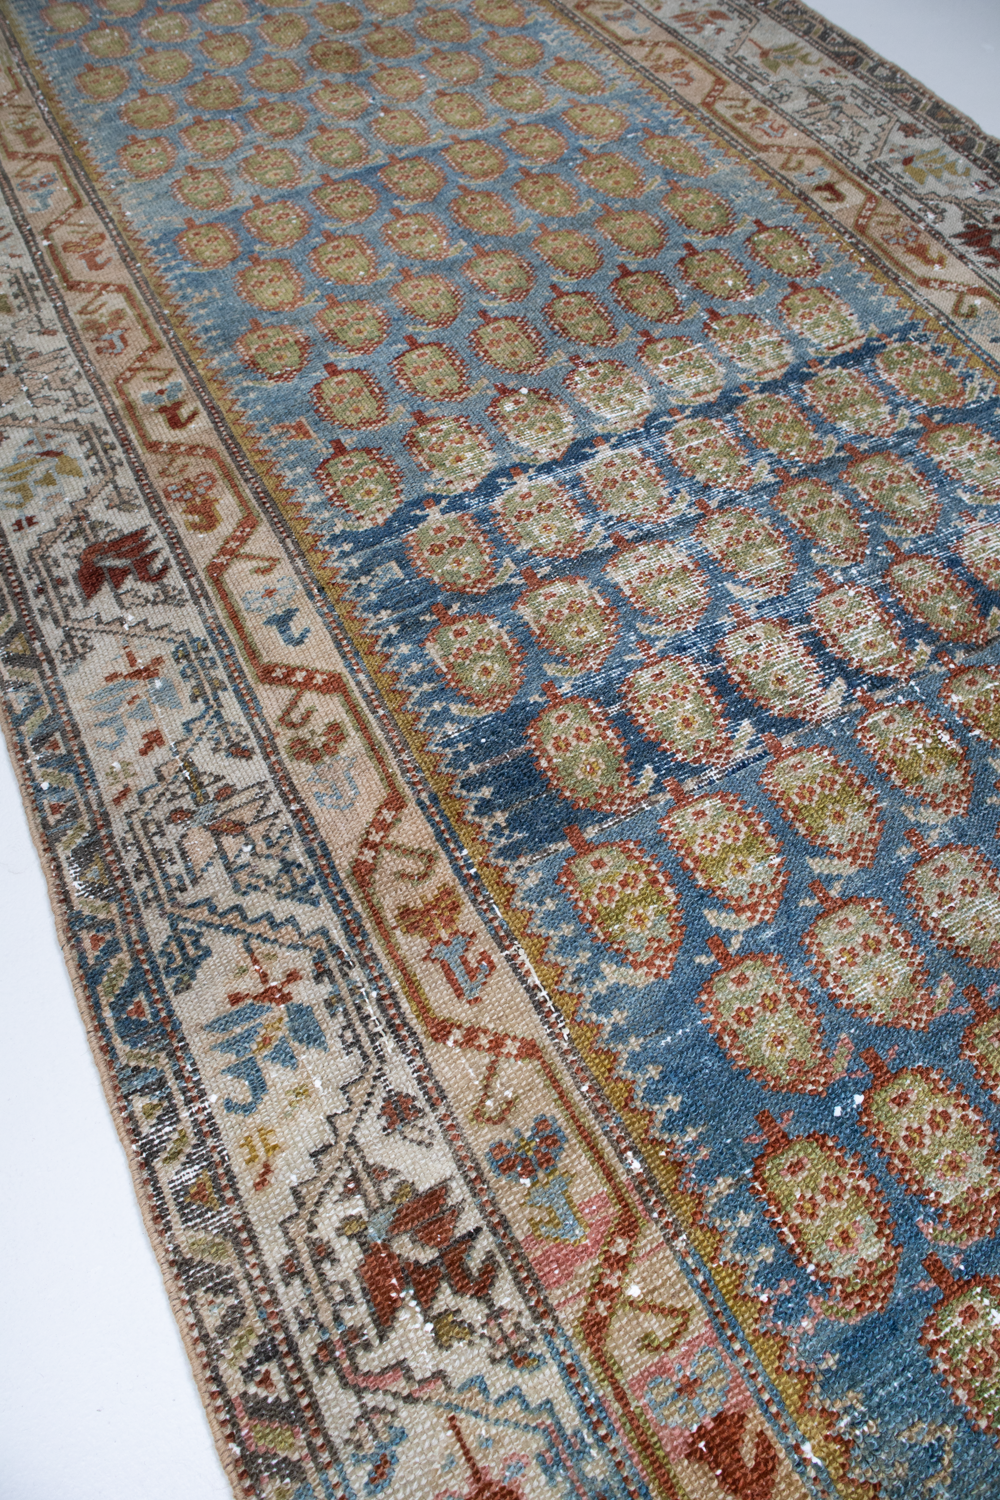 (Reserved) Antique Persian Malayer Runner Rug